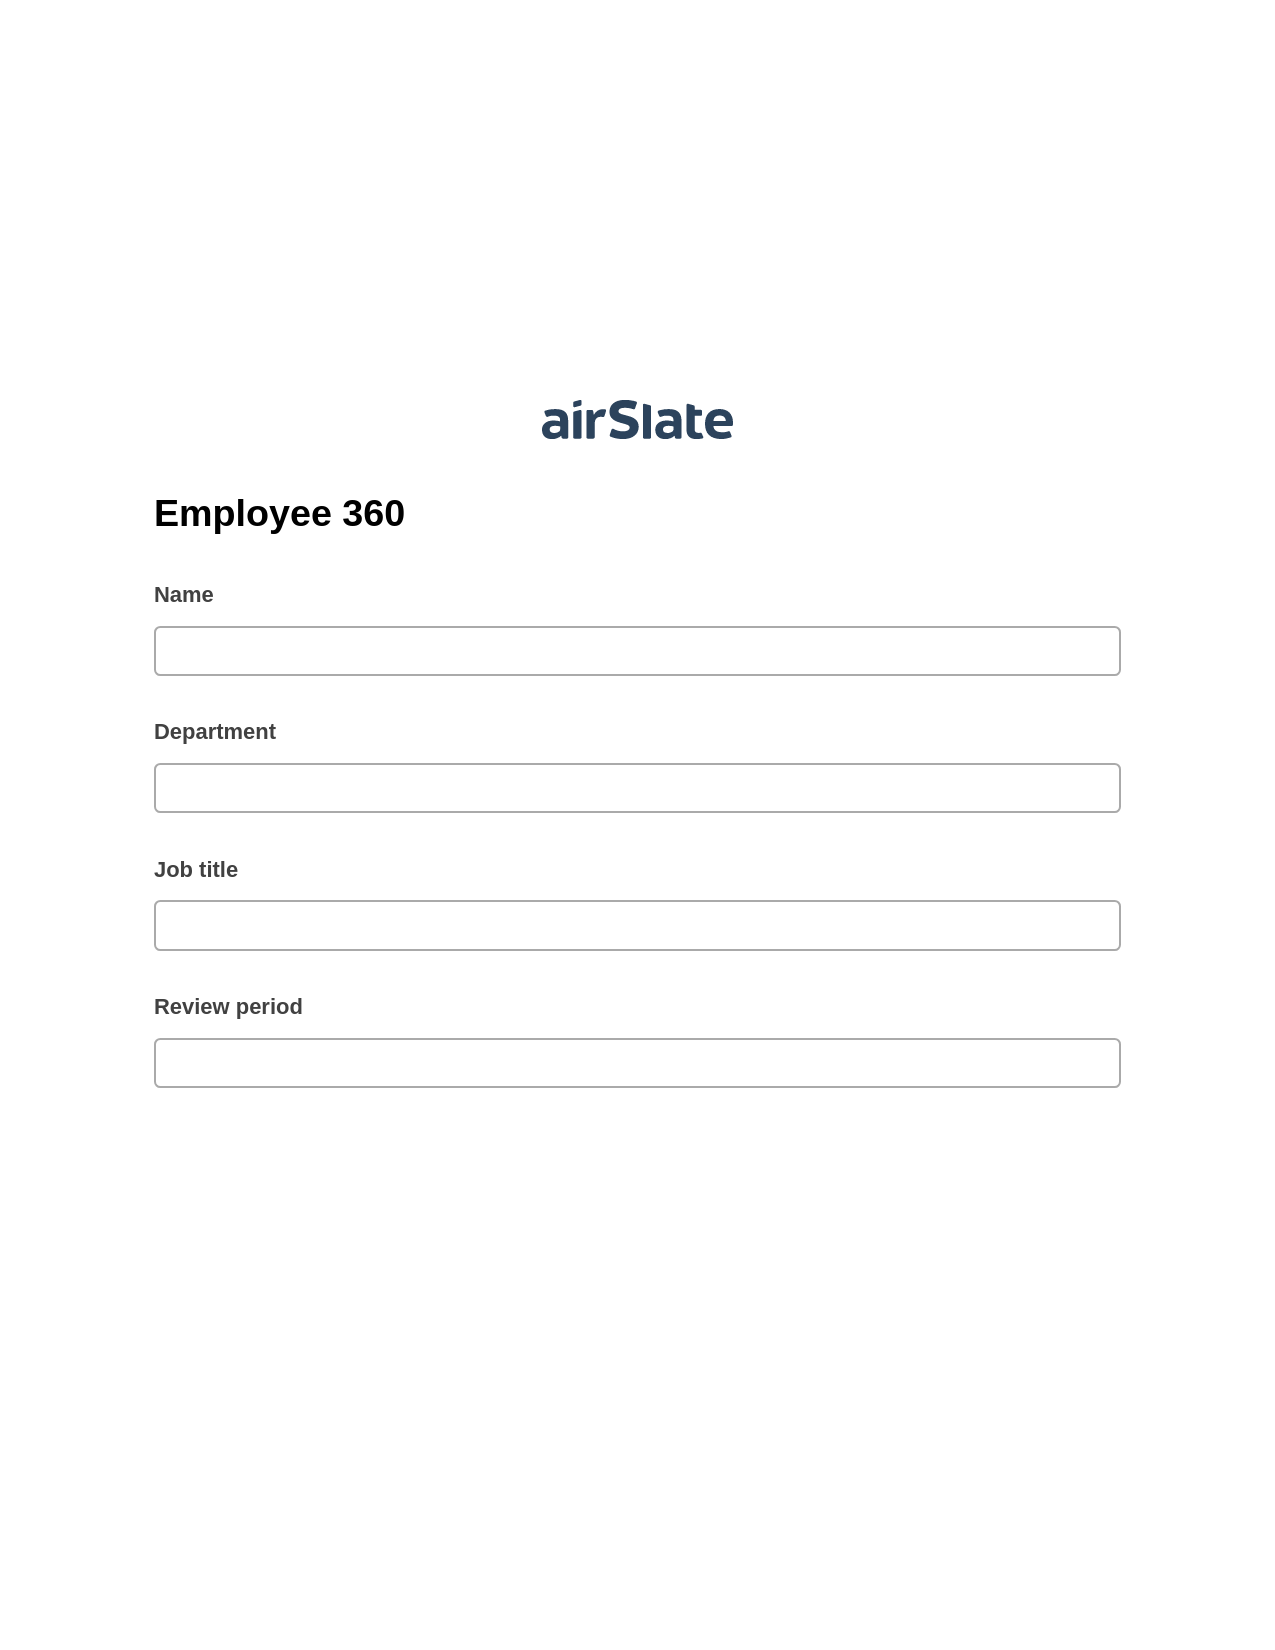 Employee 360 Pre-fill Dropdowns from Airtable, Invoke Salesforce Process Bot, Archive to SharePoint Folder Bot